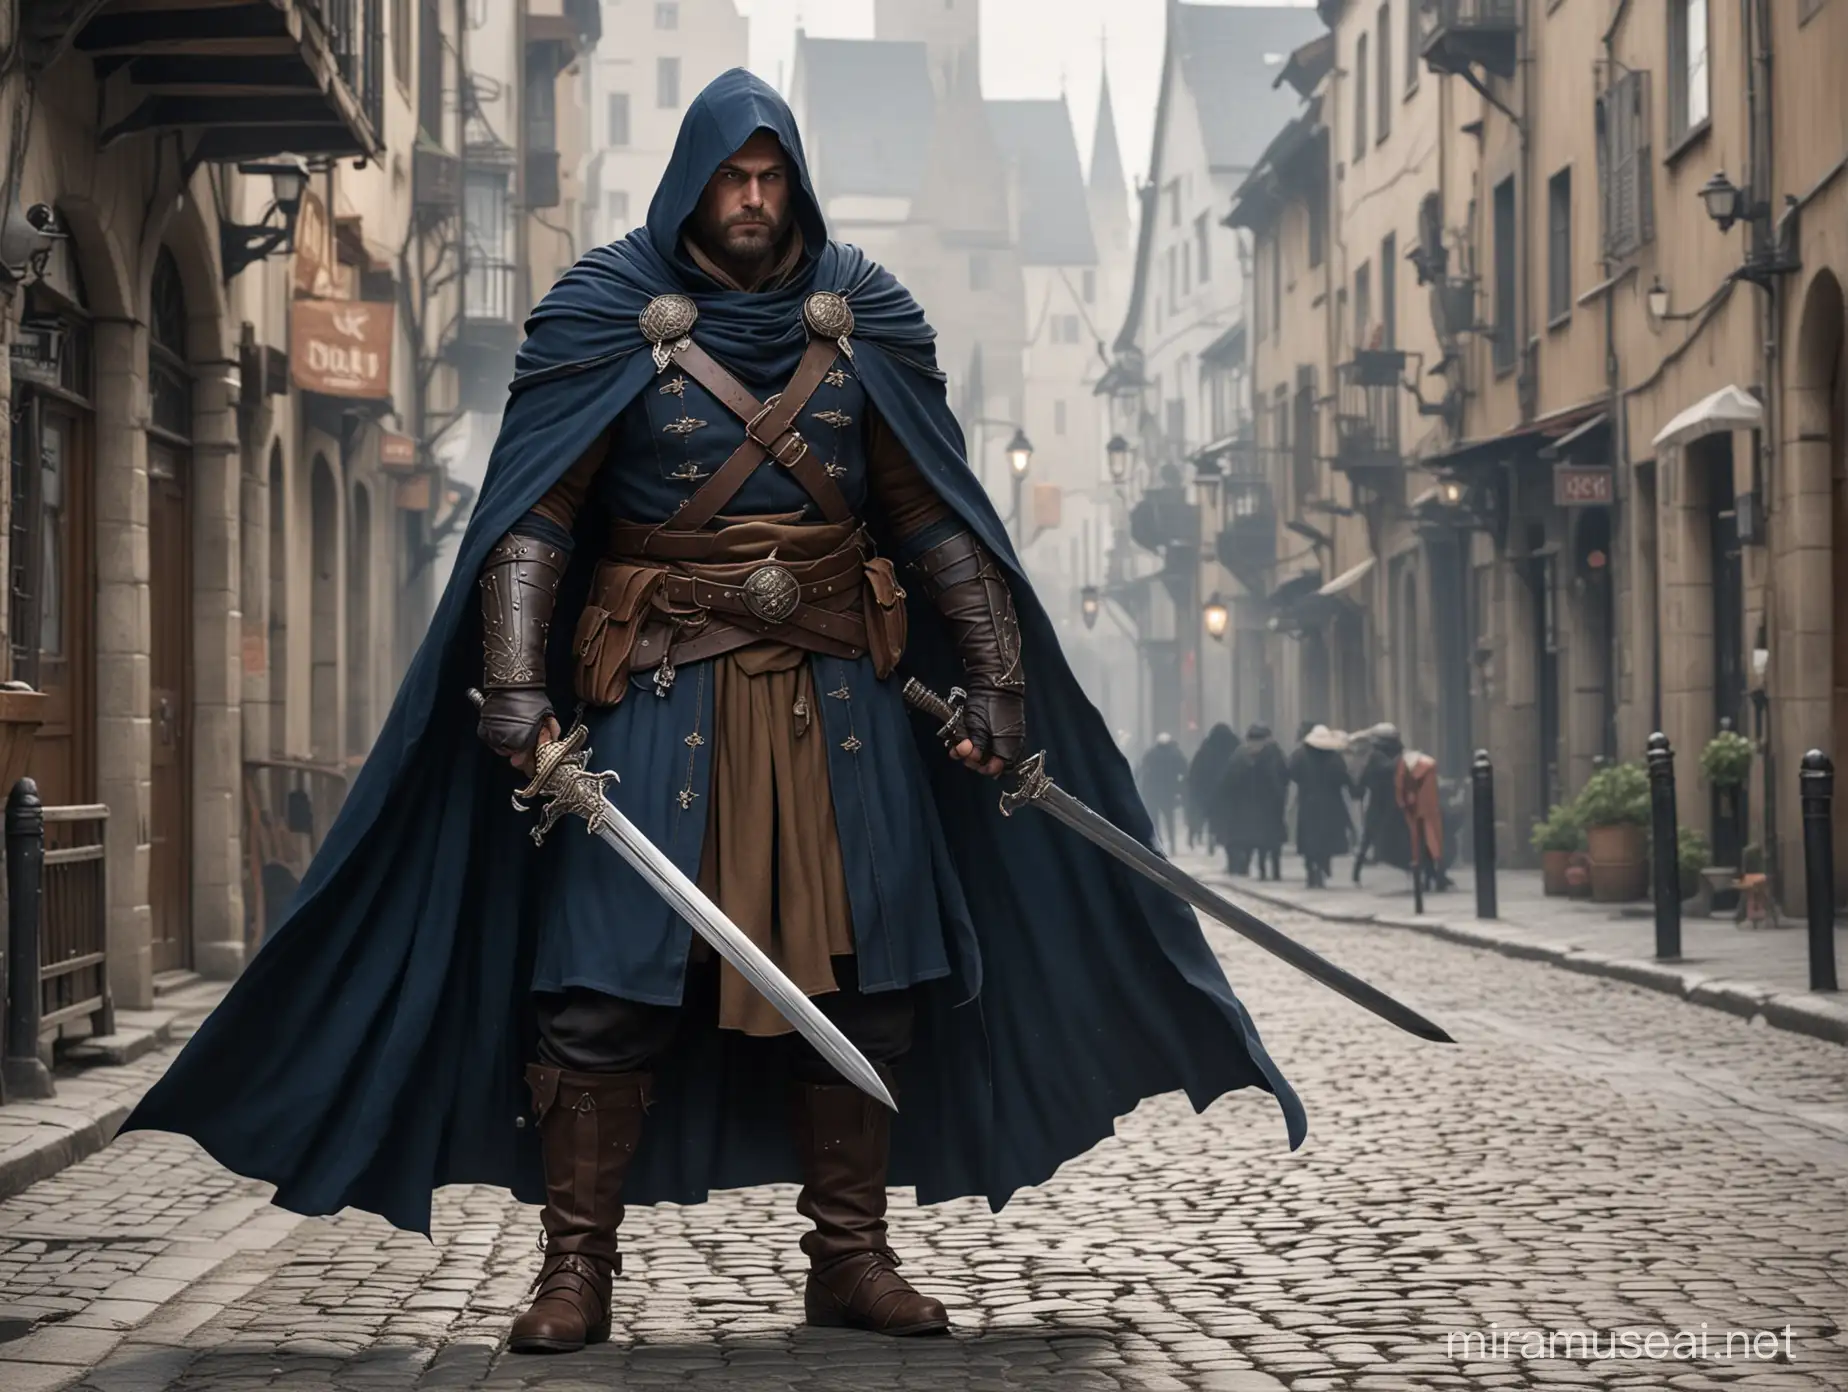 A strong fat rogue wearing dark blue cloak and brown armor and two long swords, standing in a middle age city street